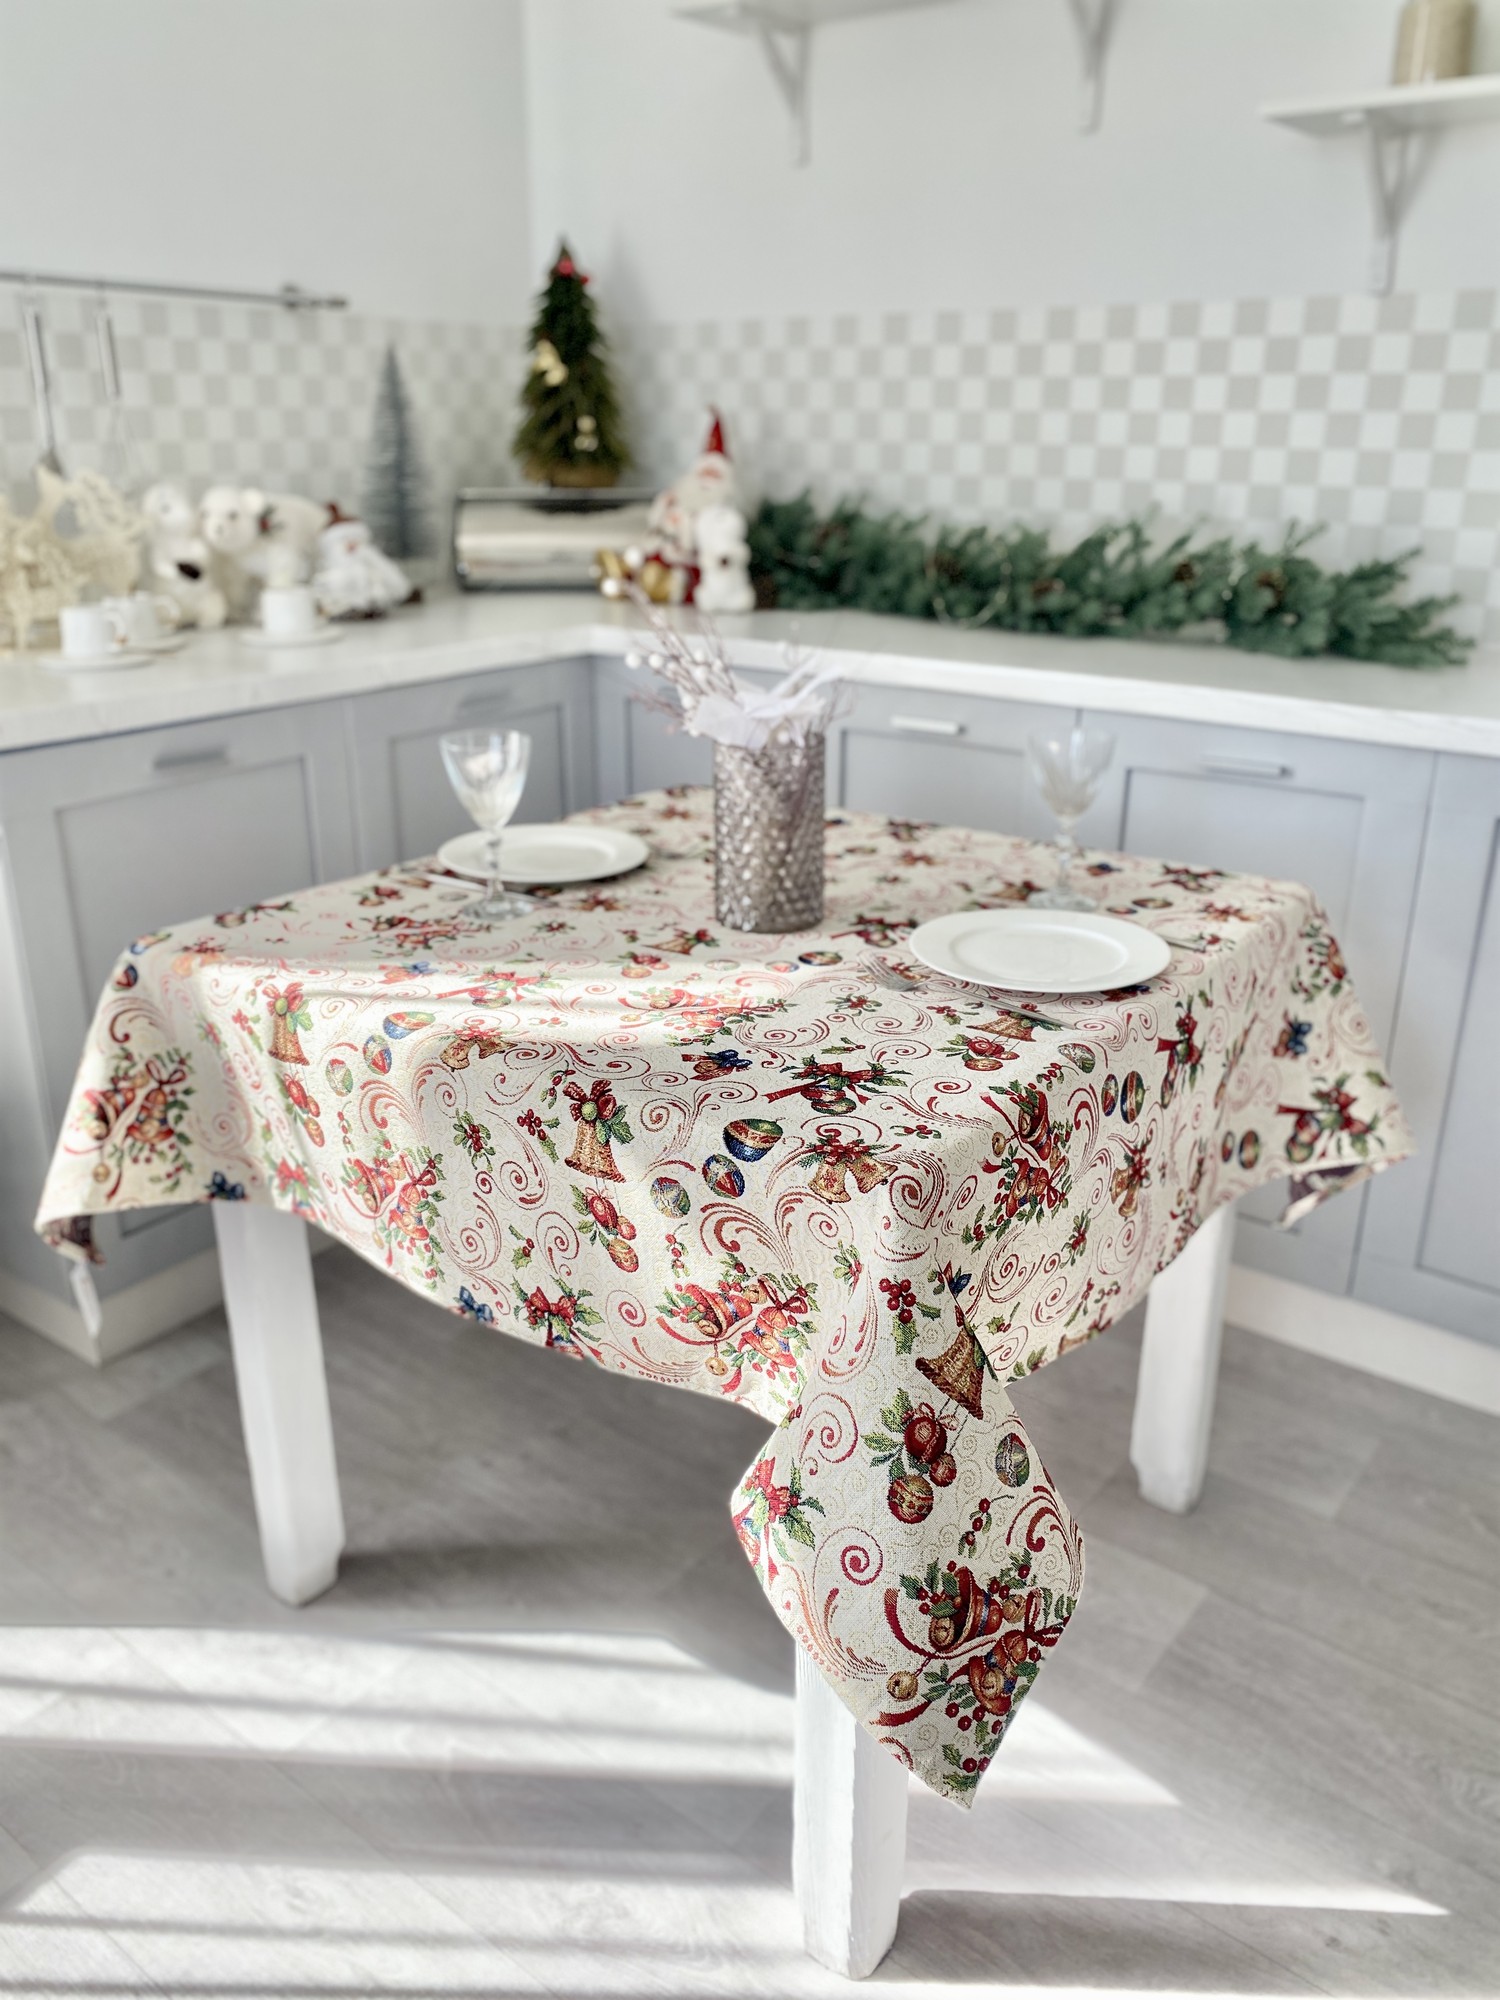 Christmas tapestry tablecloth  137 x 180 cm. festive tablecloth with gold lurex